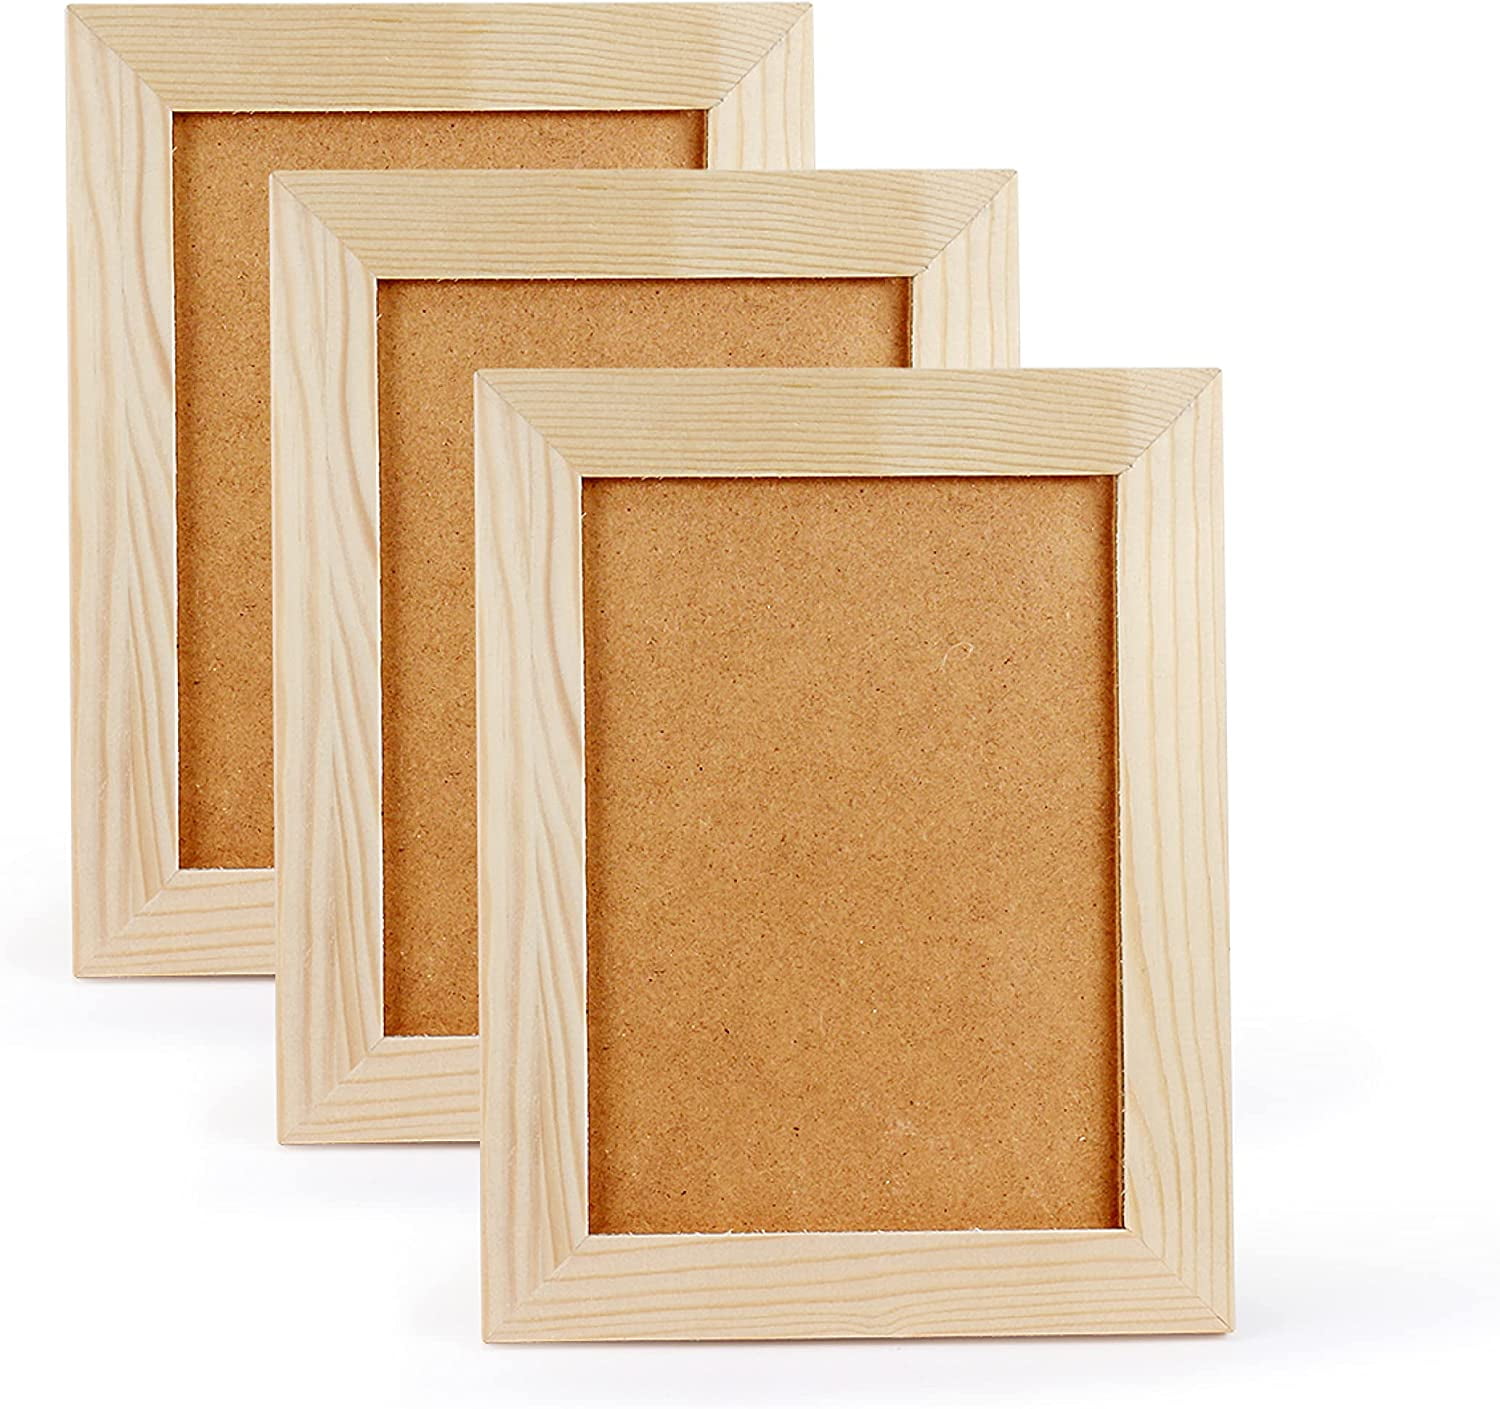 Koltose by Mash DIY Picture Frames, 4x6 Craft Frames Set, Unfinished Solid Pine Wood DIY Photo Frames, for Arts and Crafts DIY Painting Projects